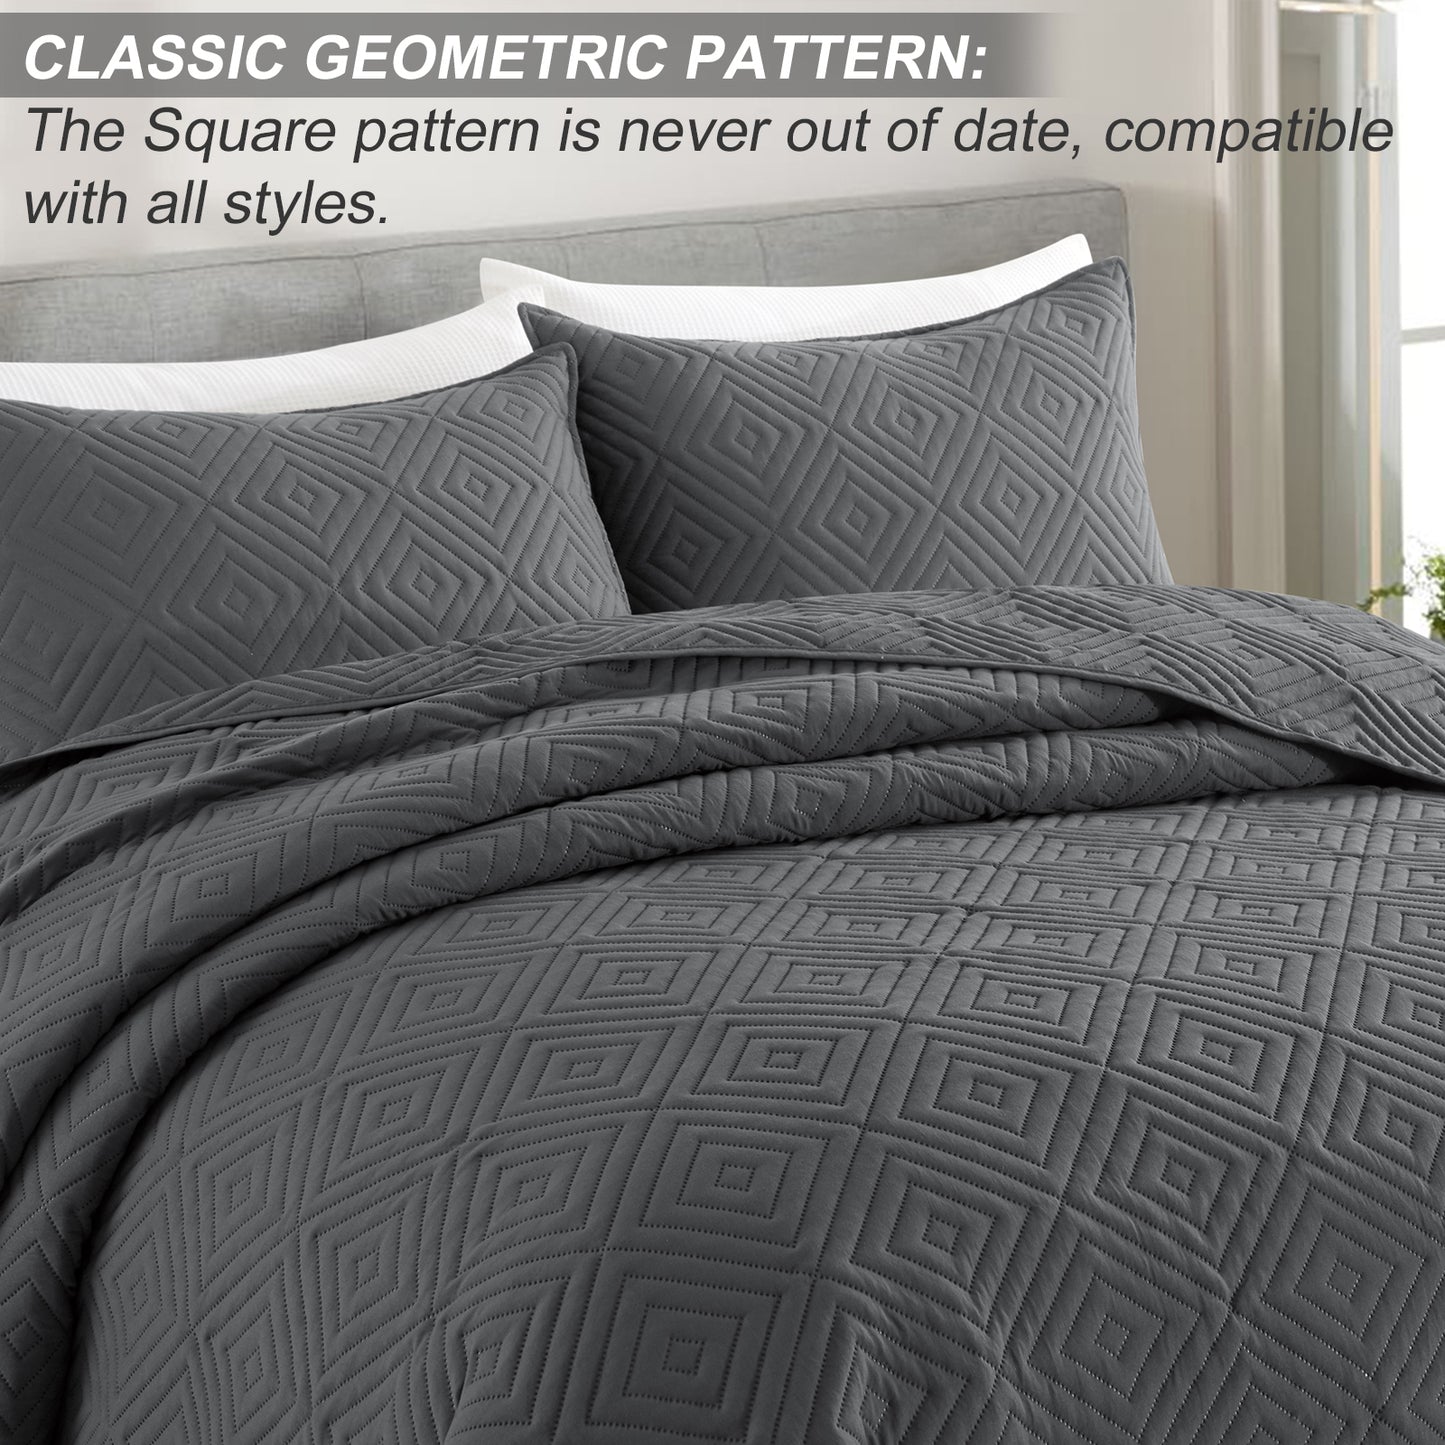 Exclusivo Mezcla 2-Piece Gray Twin Size Quilt Set, Square Pattern Ultrasonic Lightweight and Soft Quilts/Bedspreads/Coverlets/Bedding Set (1 Quilt, 1 Pillow Sham) for All Seasons